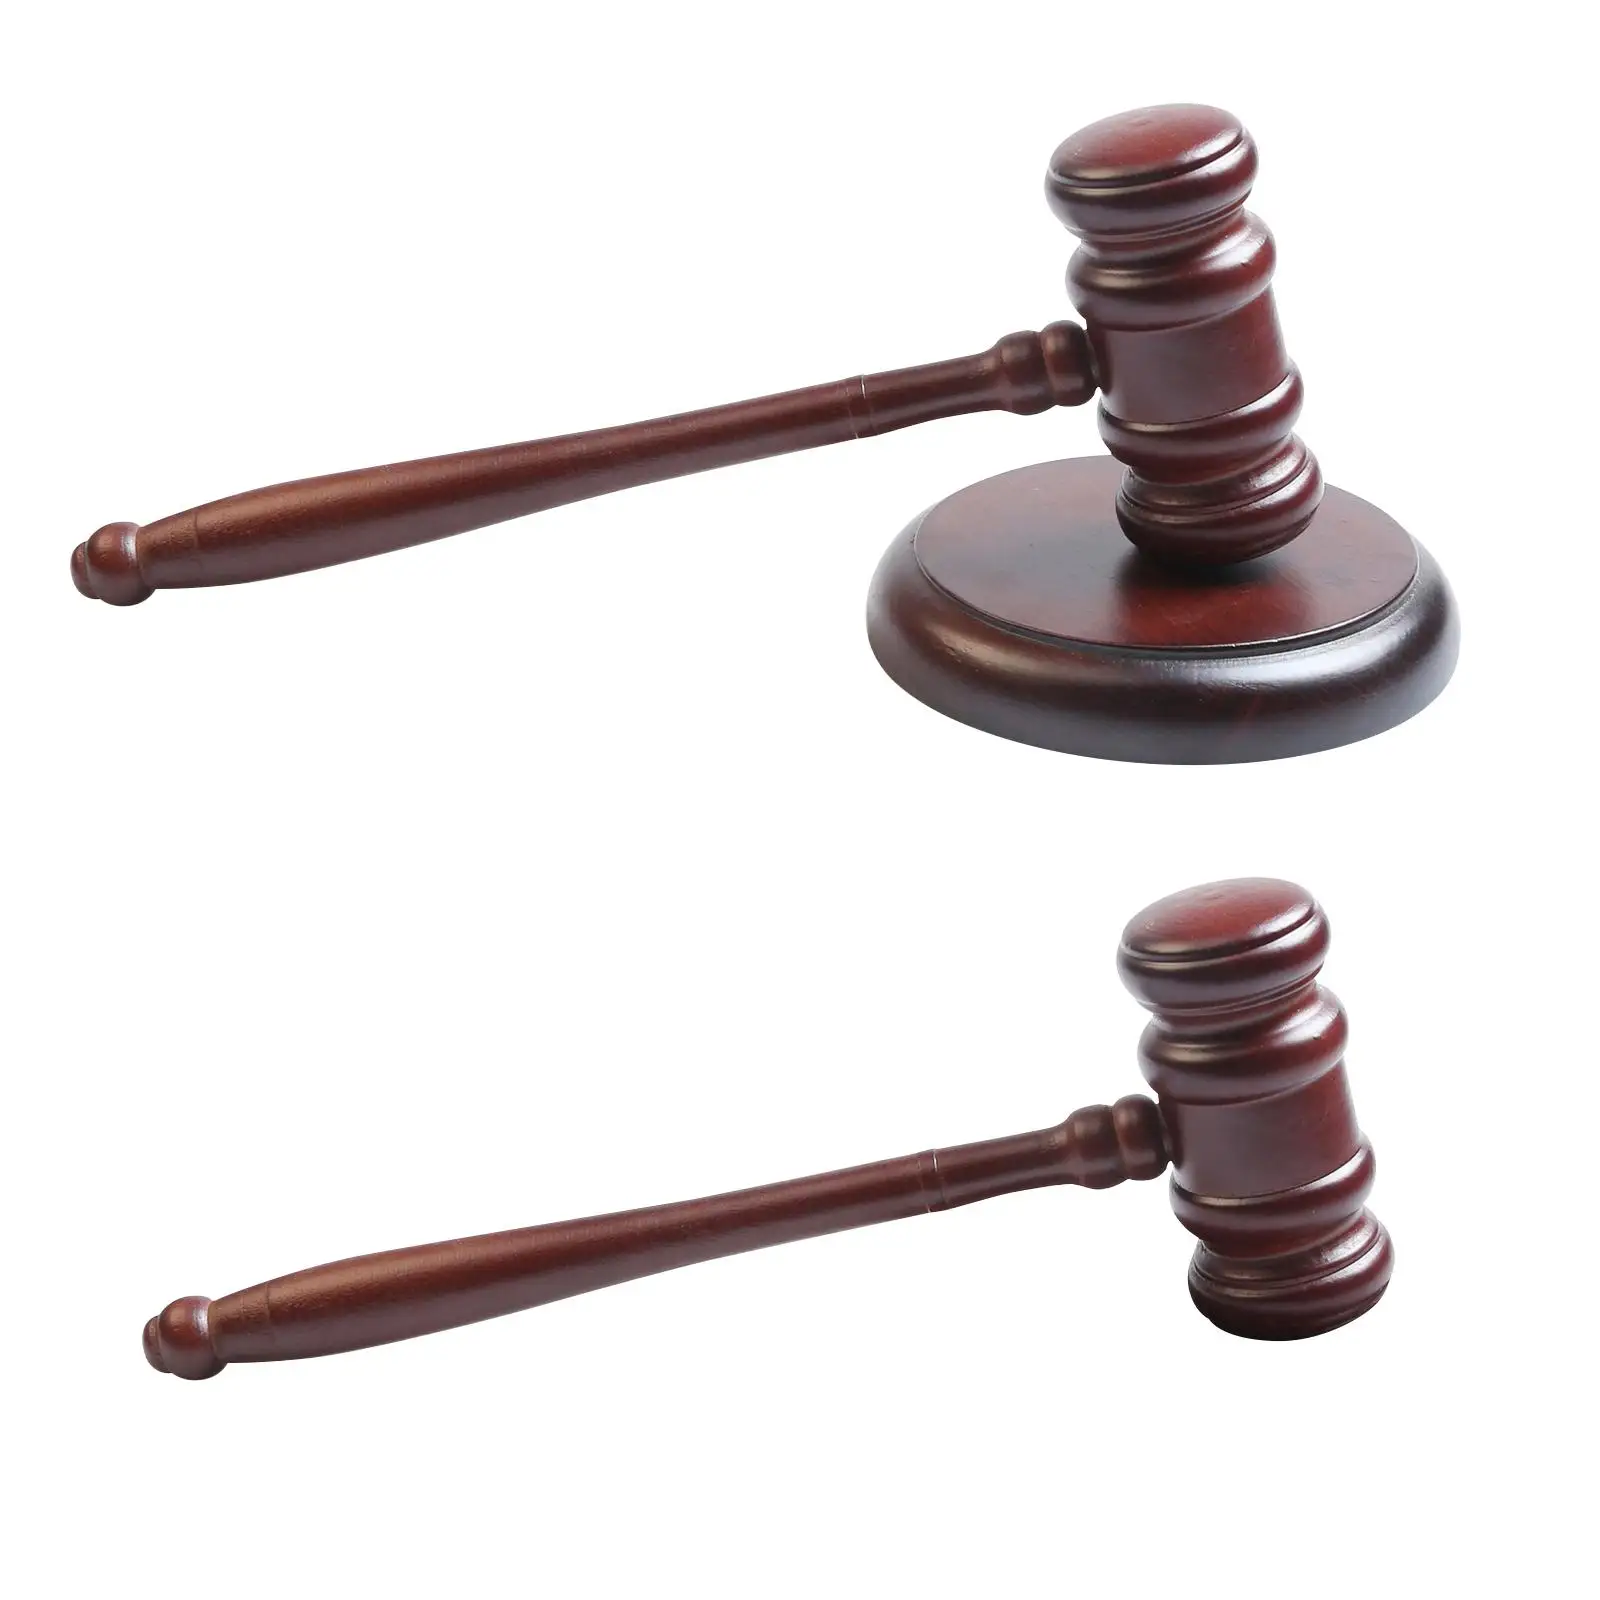 Wooden Gavel Prop Toy Wooden Gavel Cosplay Props for Auction Court Student Judge